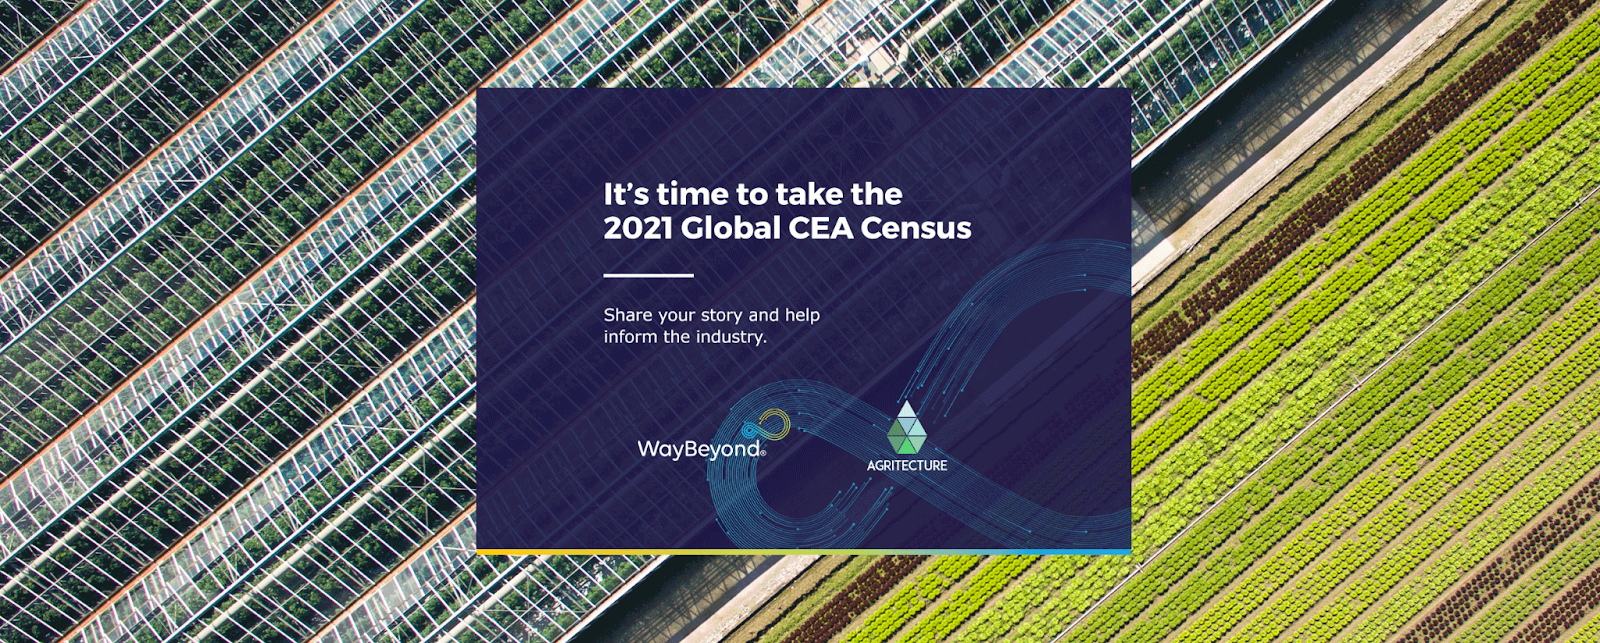 promotional image for the 2021 Global CEA Census